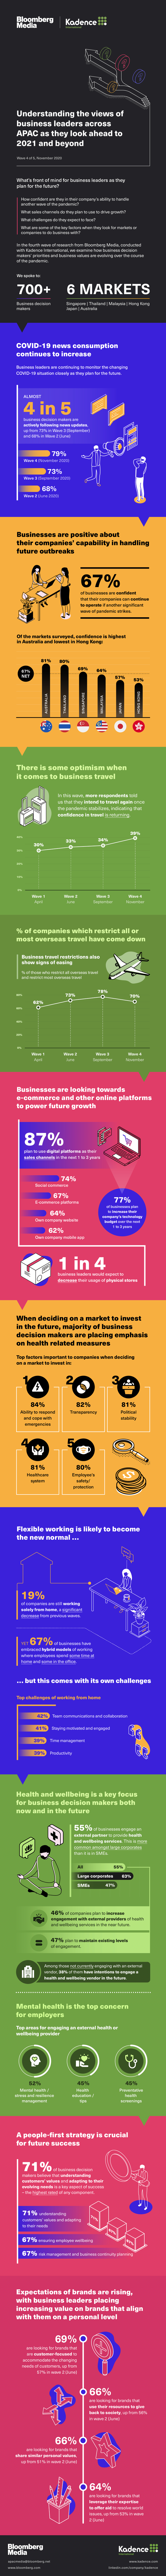 Understanding the views of business decision makers - Infographic